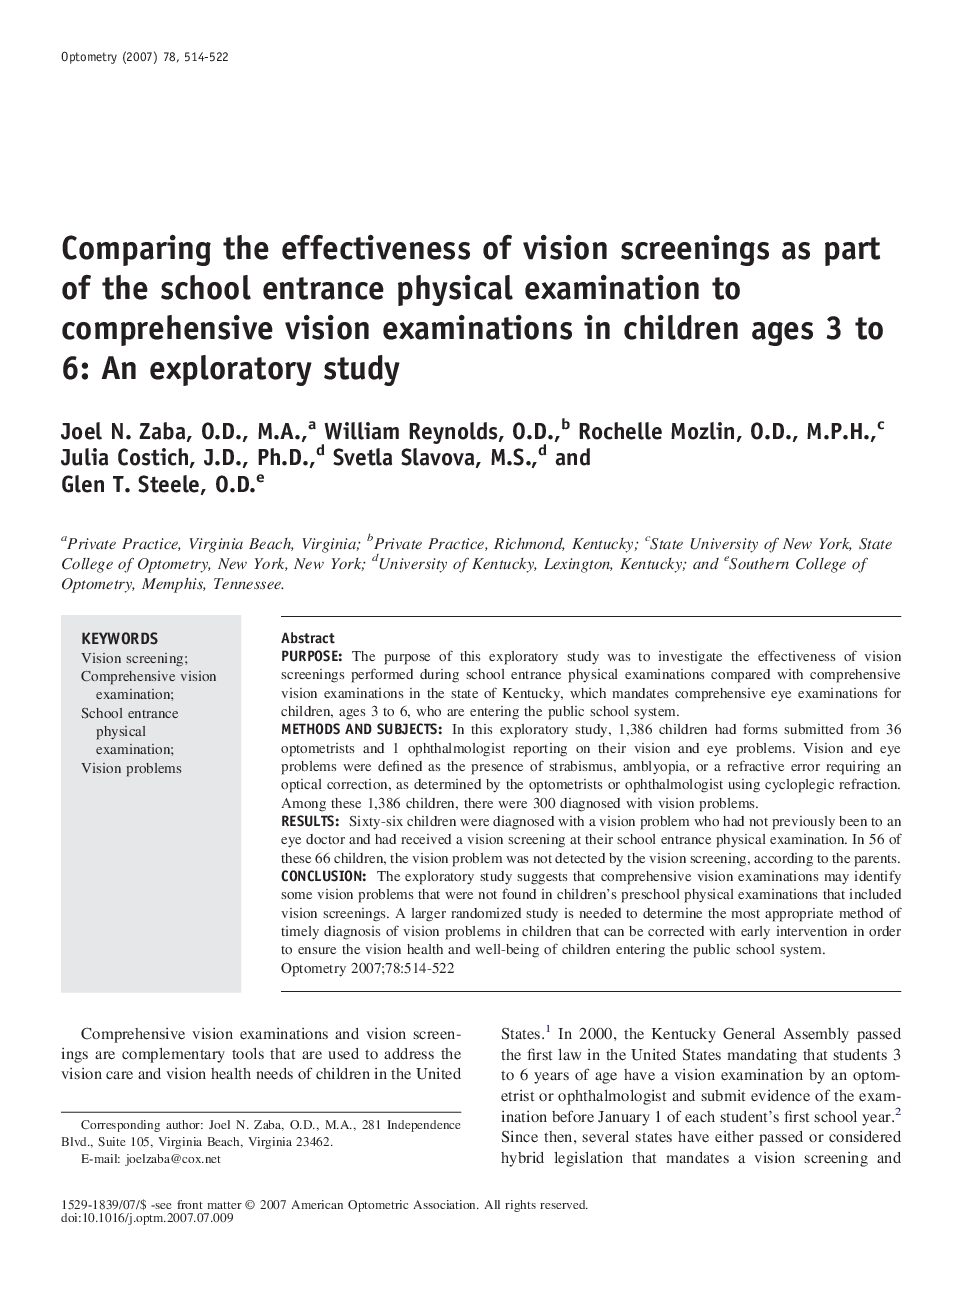 Comparing the effectiveness of vision screenings as part of the school entrance physical examination to comprehensive vision examinations in children ages 3 to 6: An exploratory study